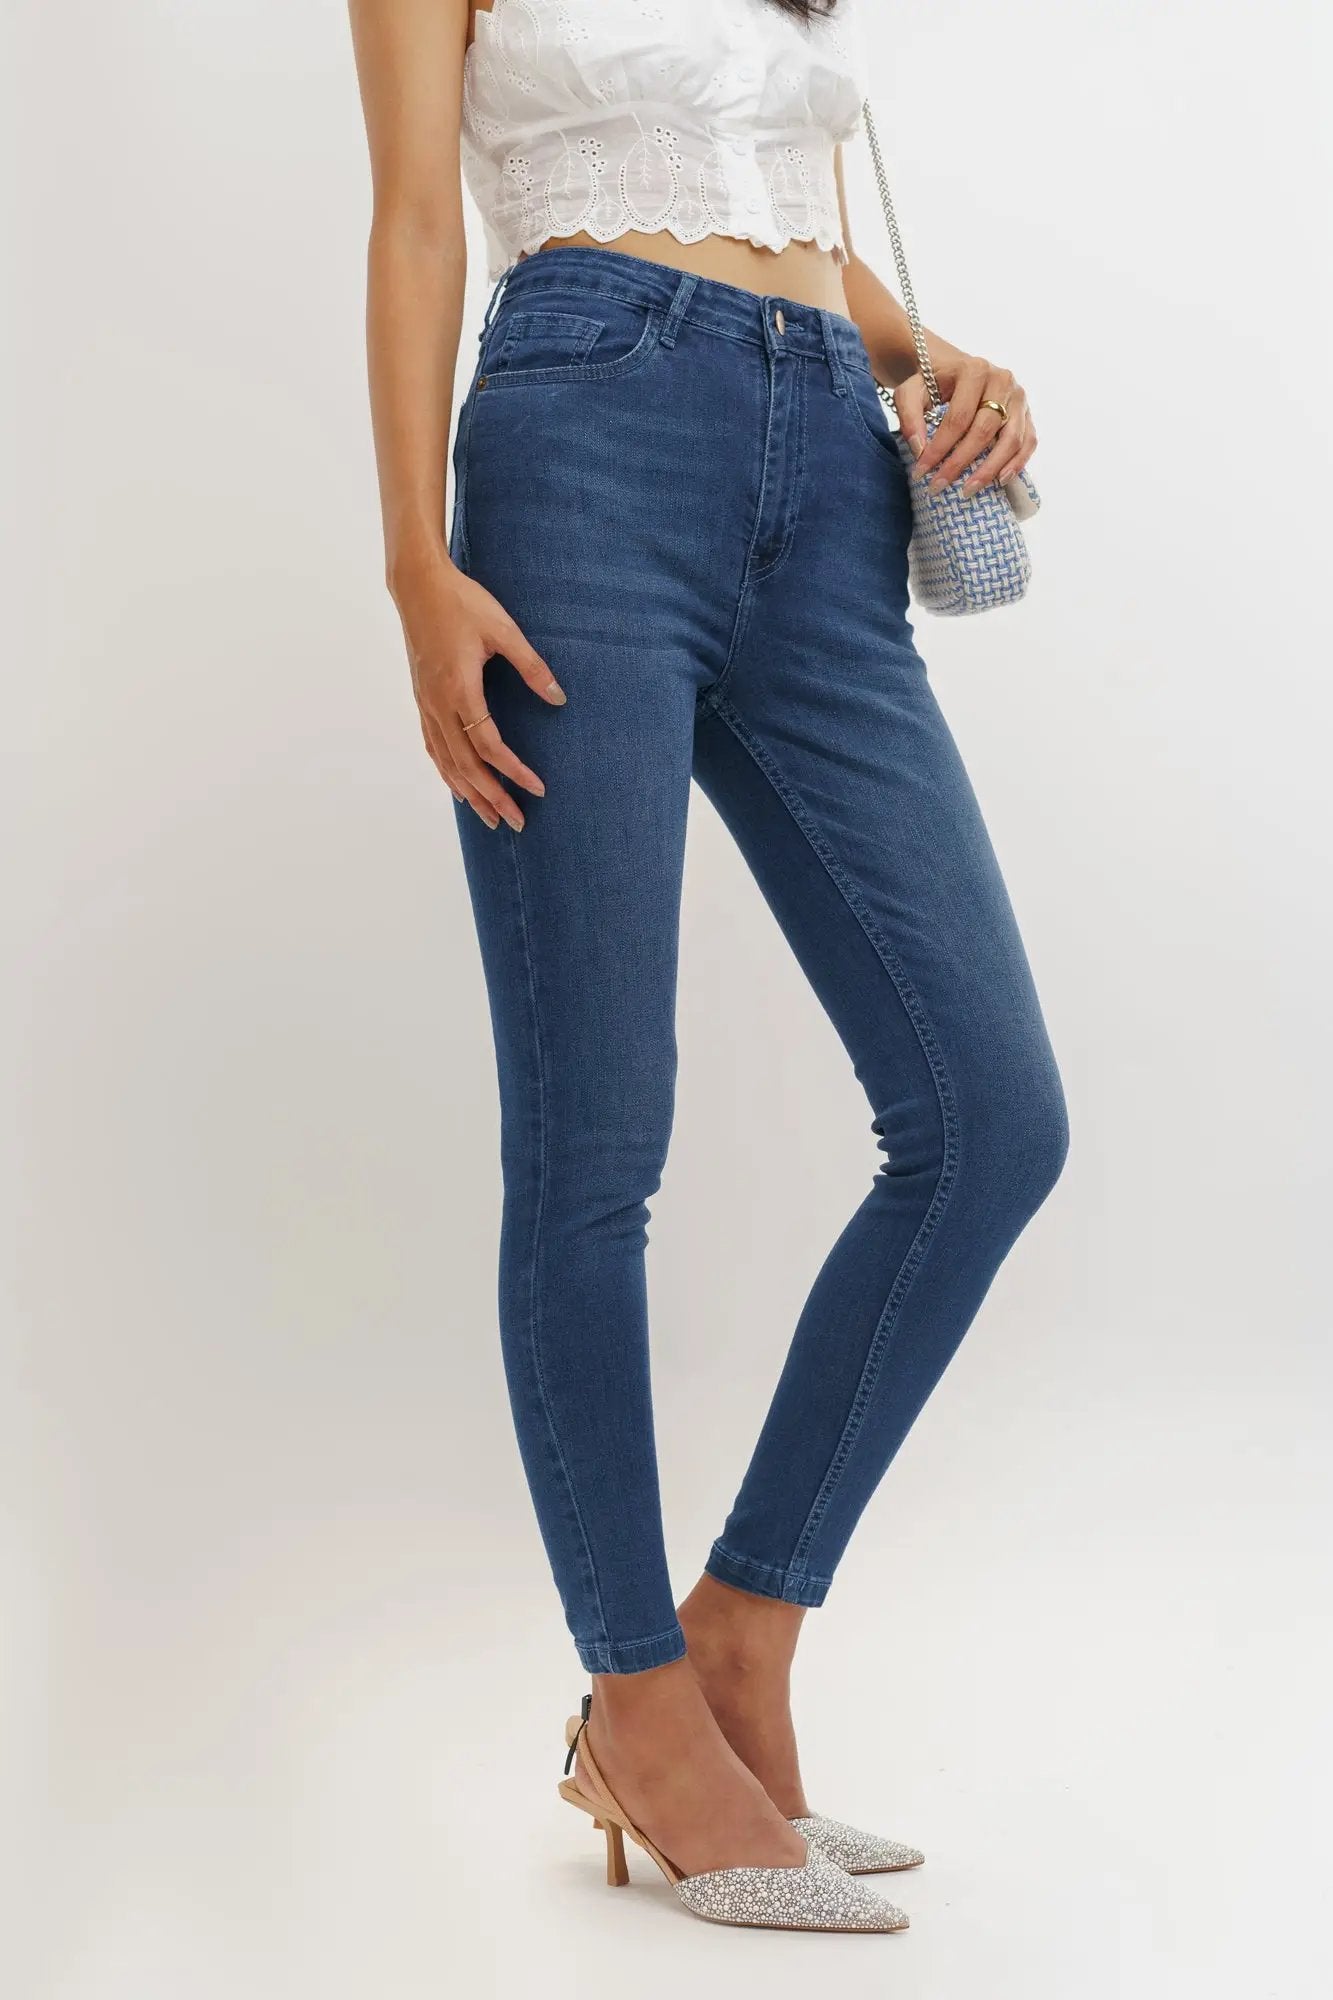 Buy High Waisted Women's Jeans Pants Online Starting @ ₹790